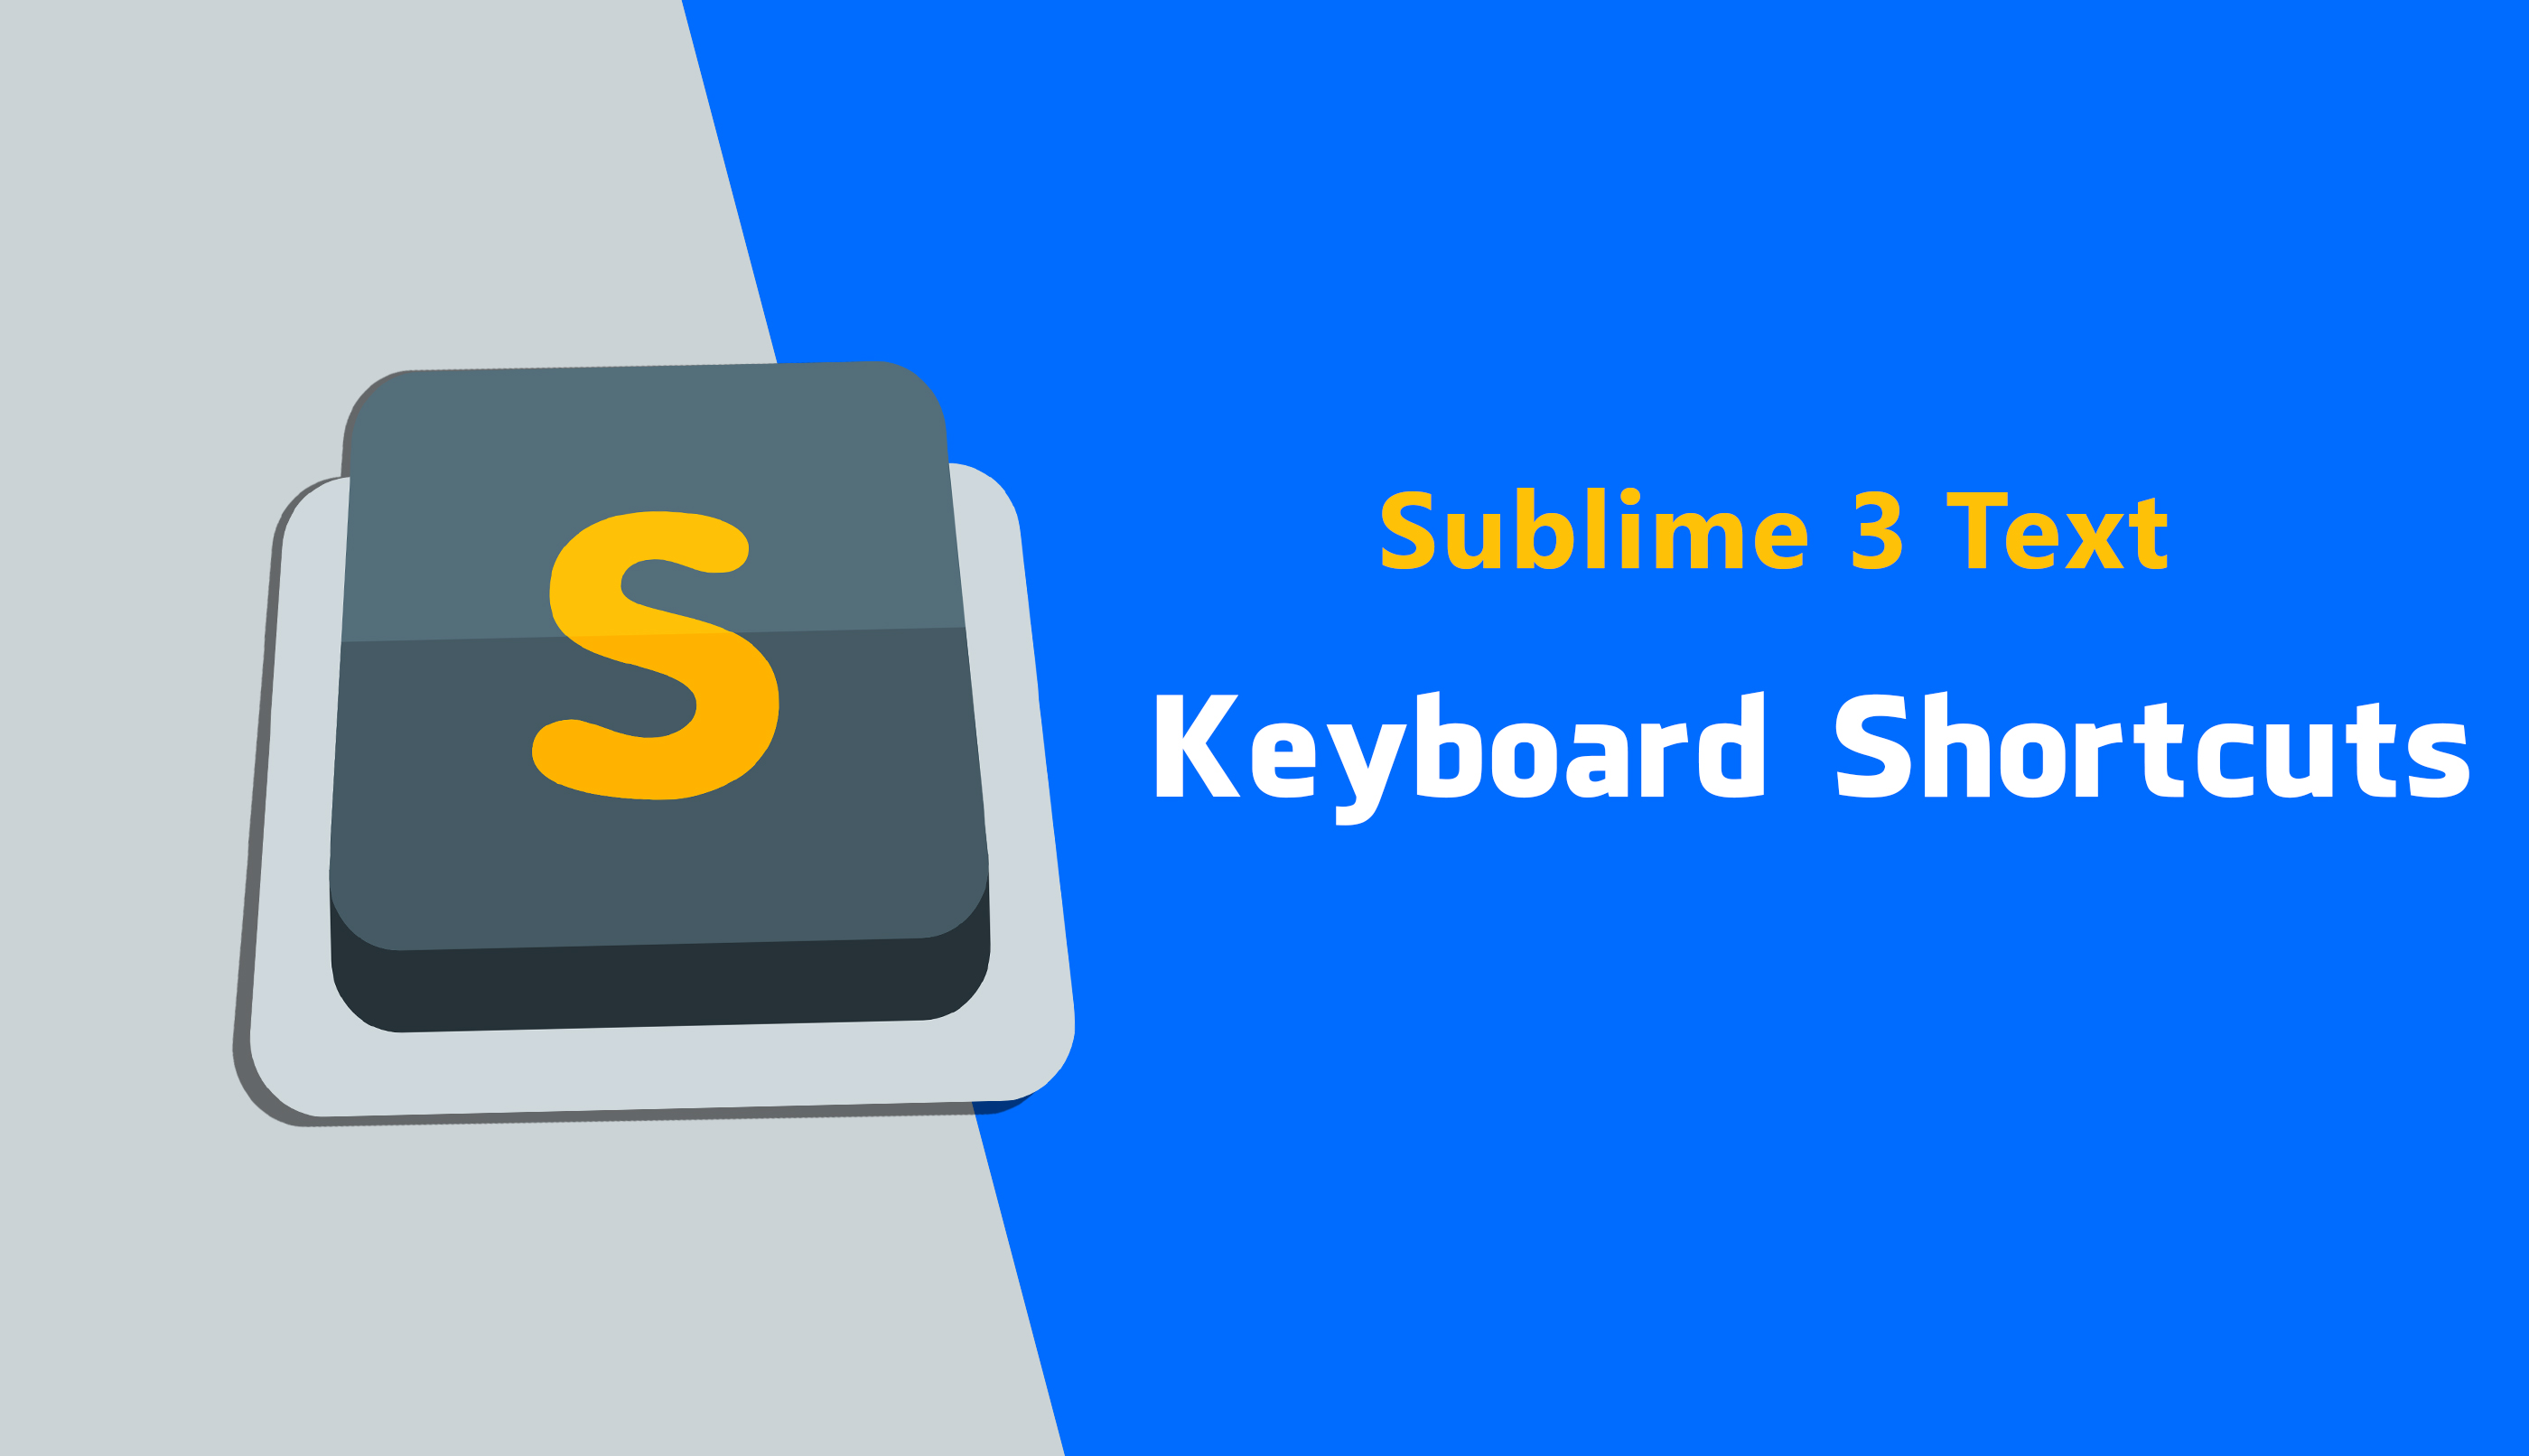 Sublime Text Editor Keyboard Shortcut Cheatsheet for Win, OSX, and Linux